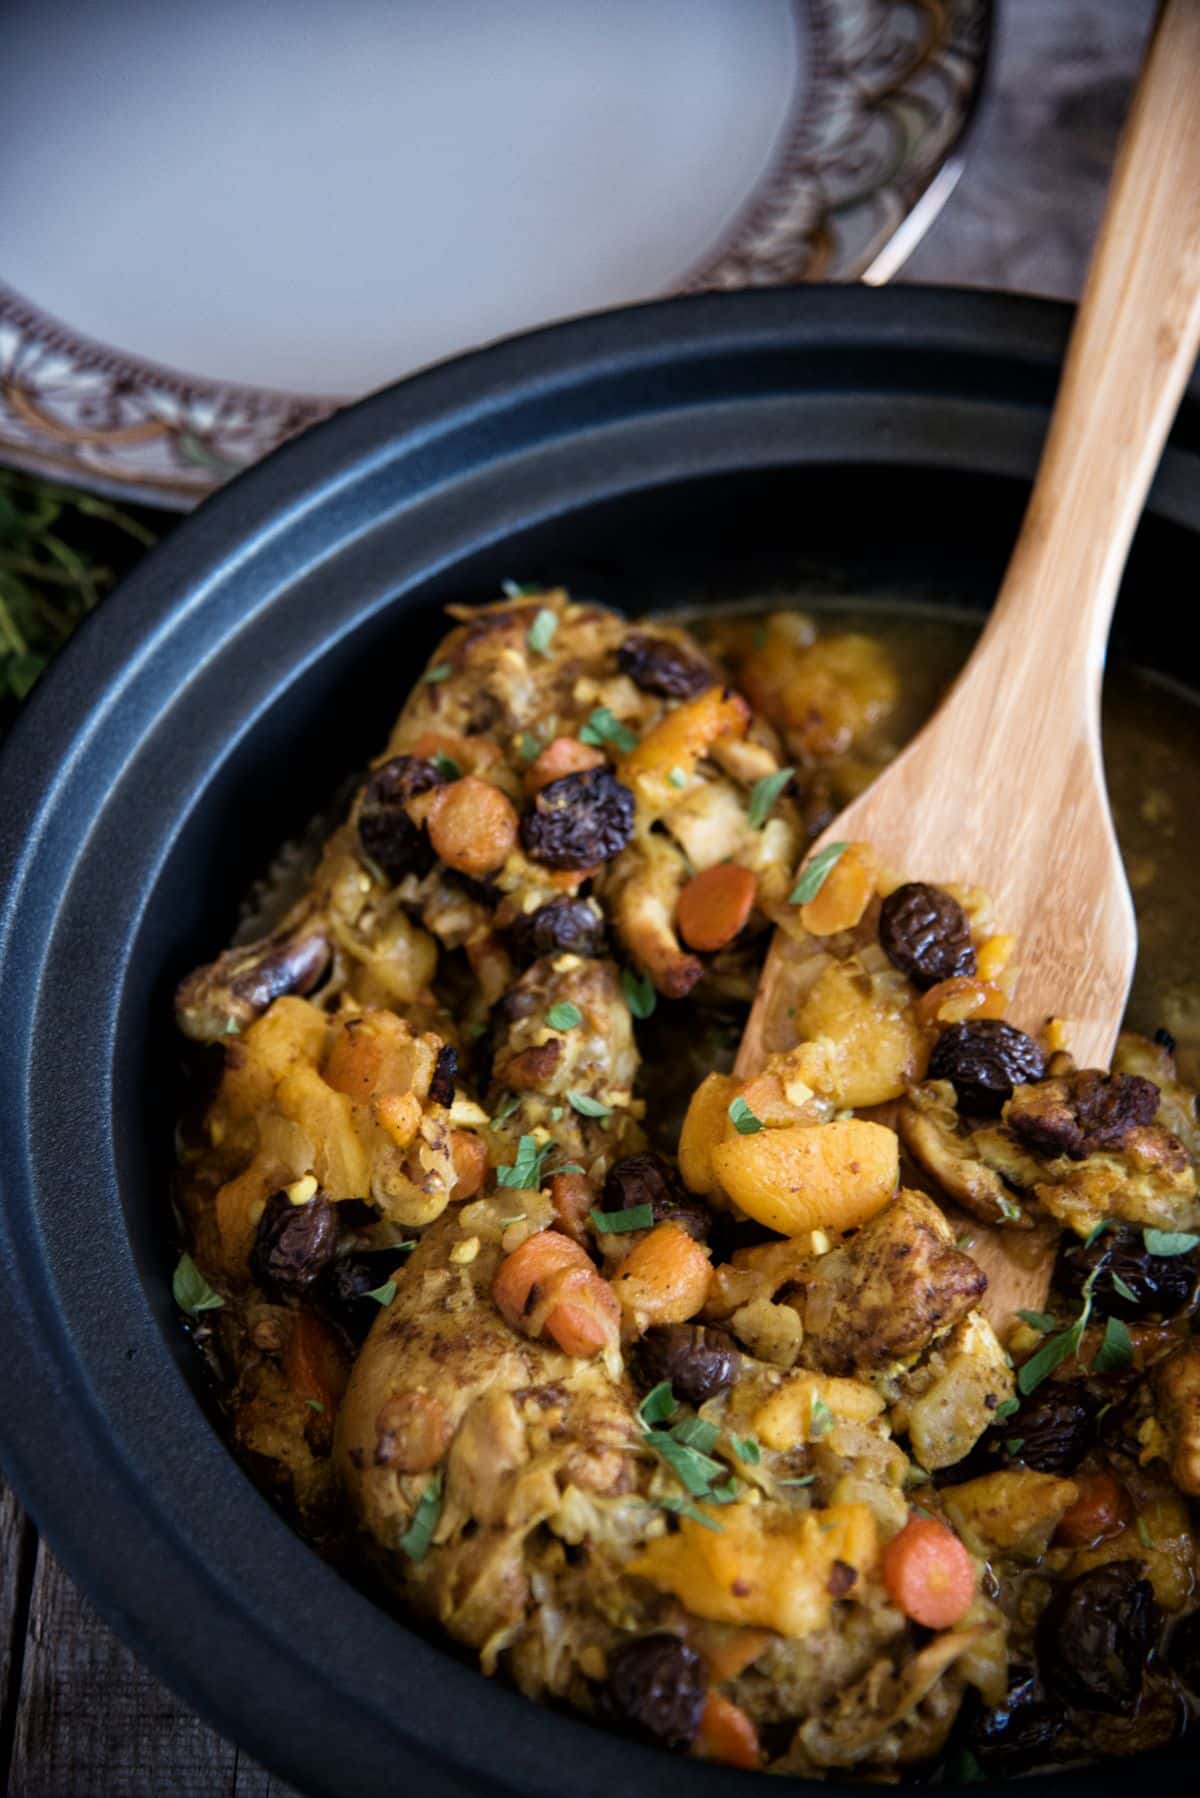 Moroccan-Style Chicken Tagine in a black pot with a wooden spatula.